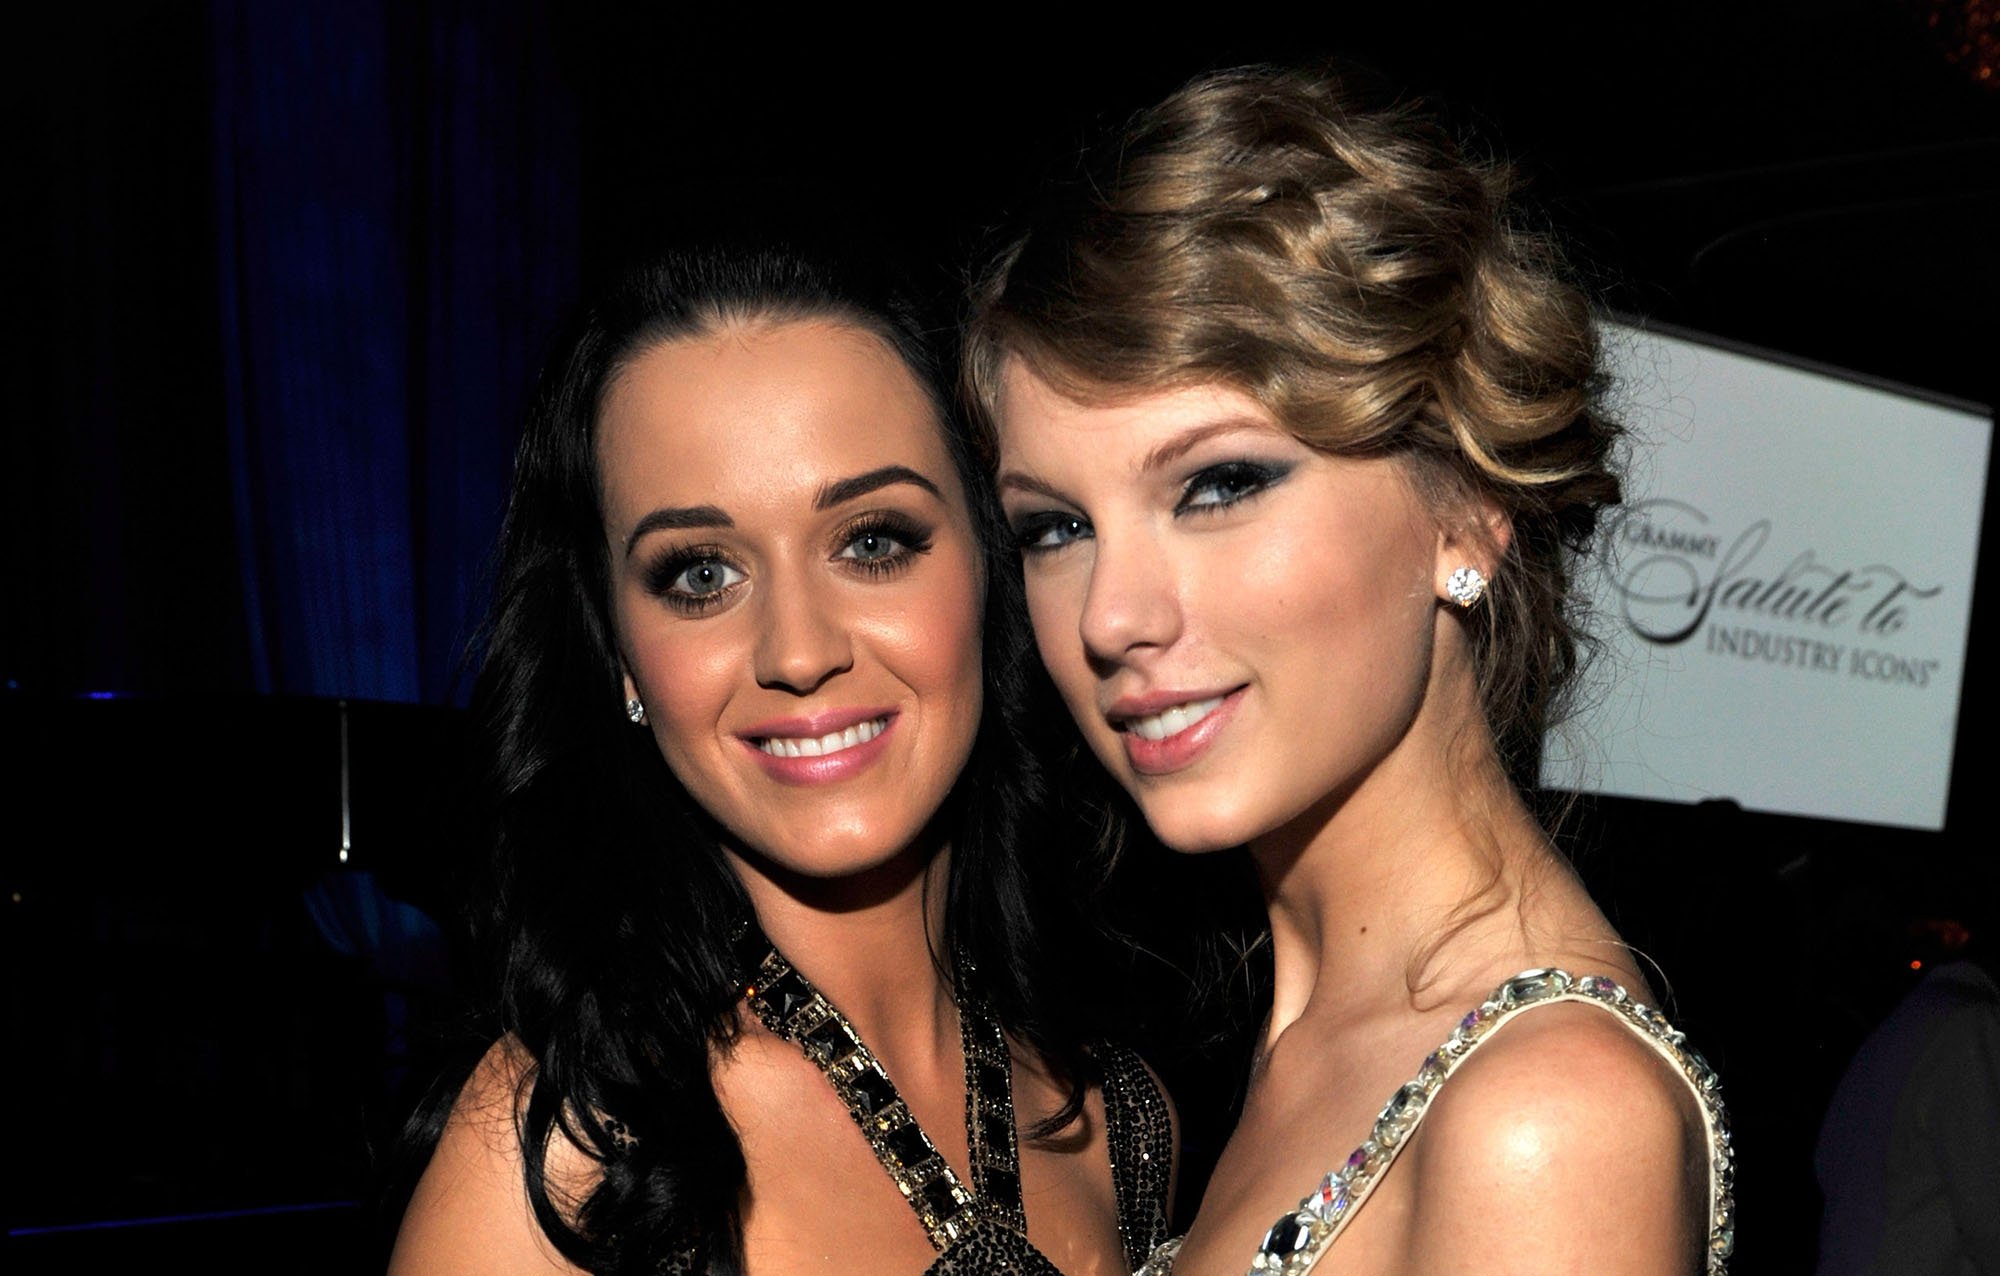 Katy Perry and Taylor Swift at the 52nd Annual GRAMMY Awards - Salute To Icons Honoring Doug Morris held at The Beverly Hilton Hotel on January 30, 2010 in Beverly Hills, California.